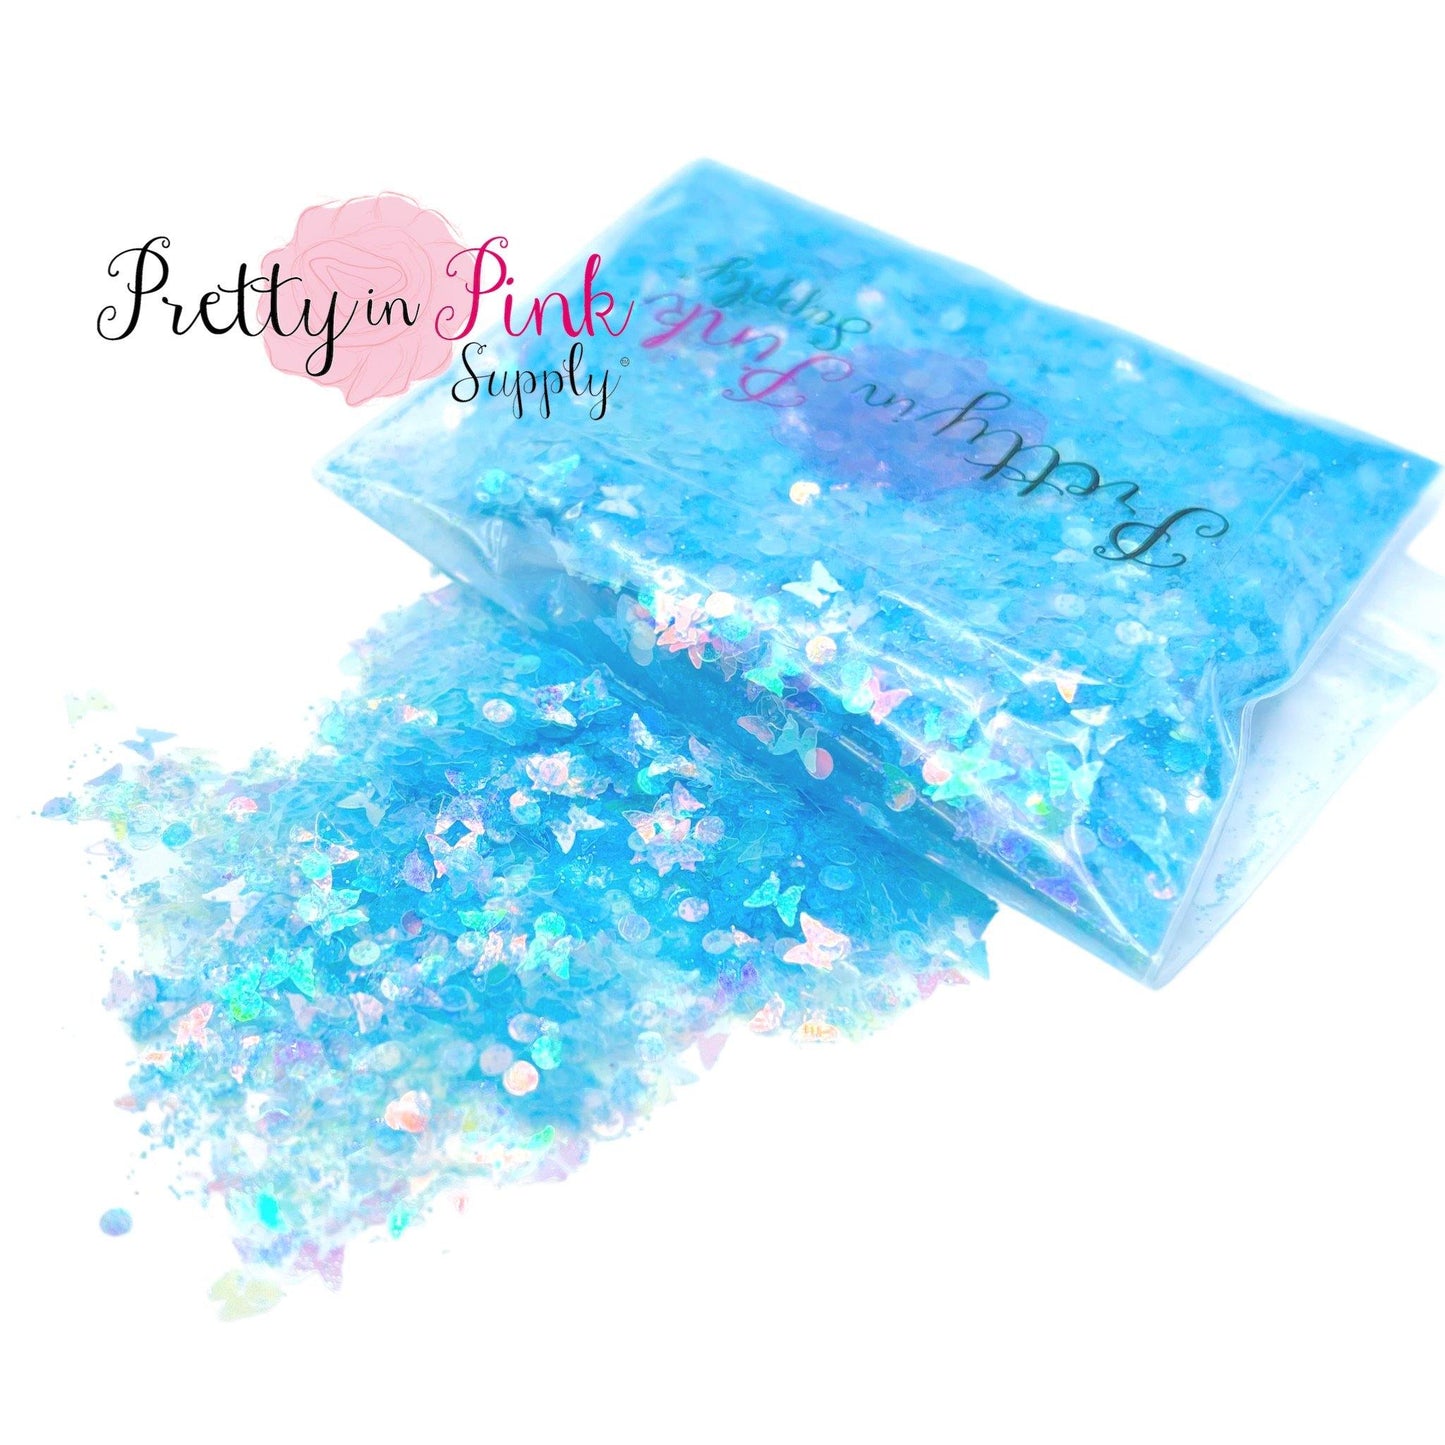 Blue Flower Butterfly Iridescent Chunky/Fine Mix | Glitter - Pretty in Pink Supply